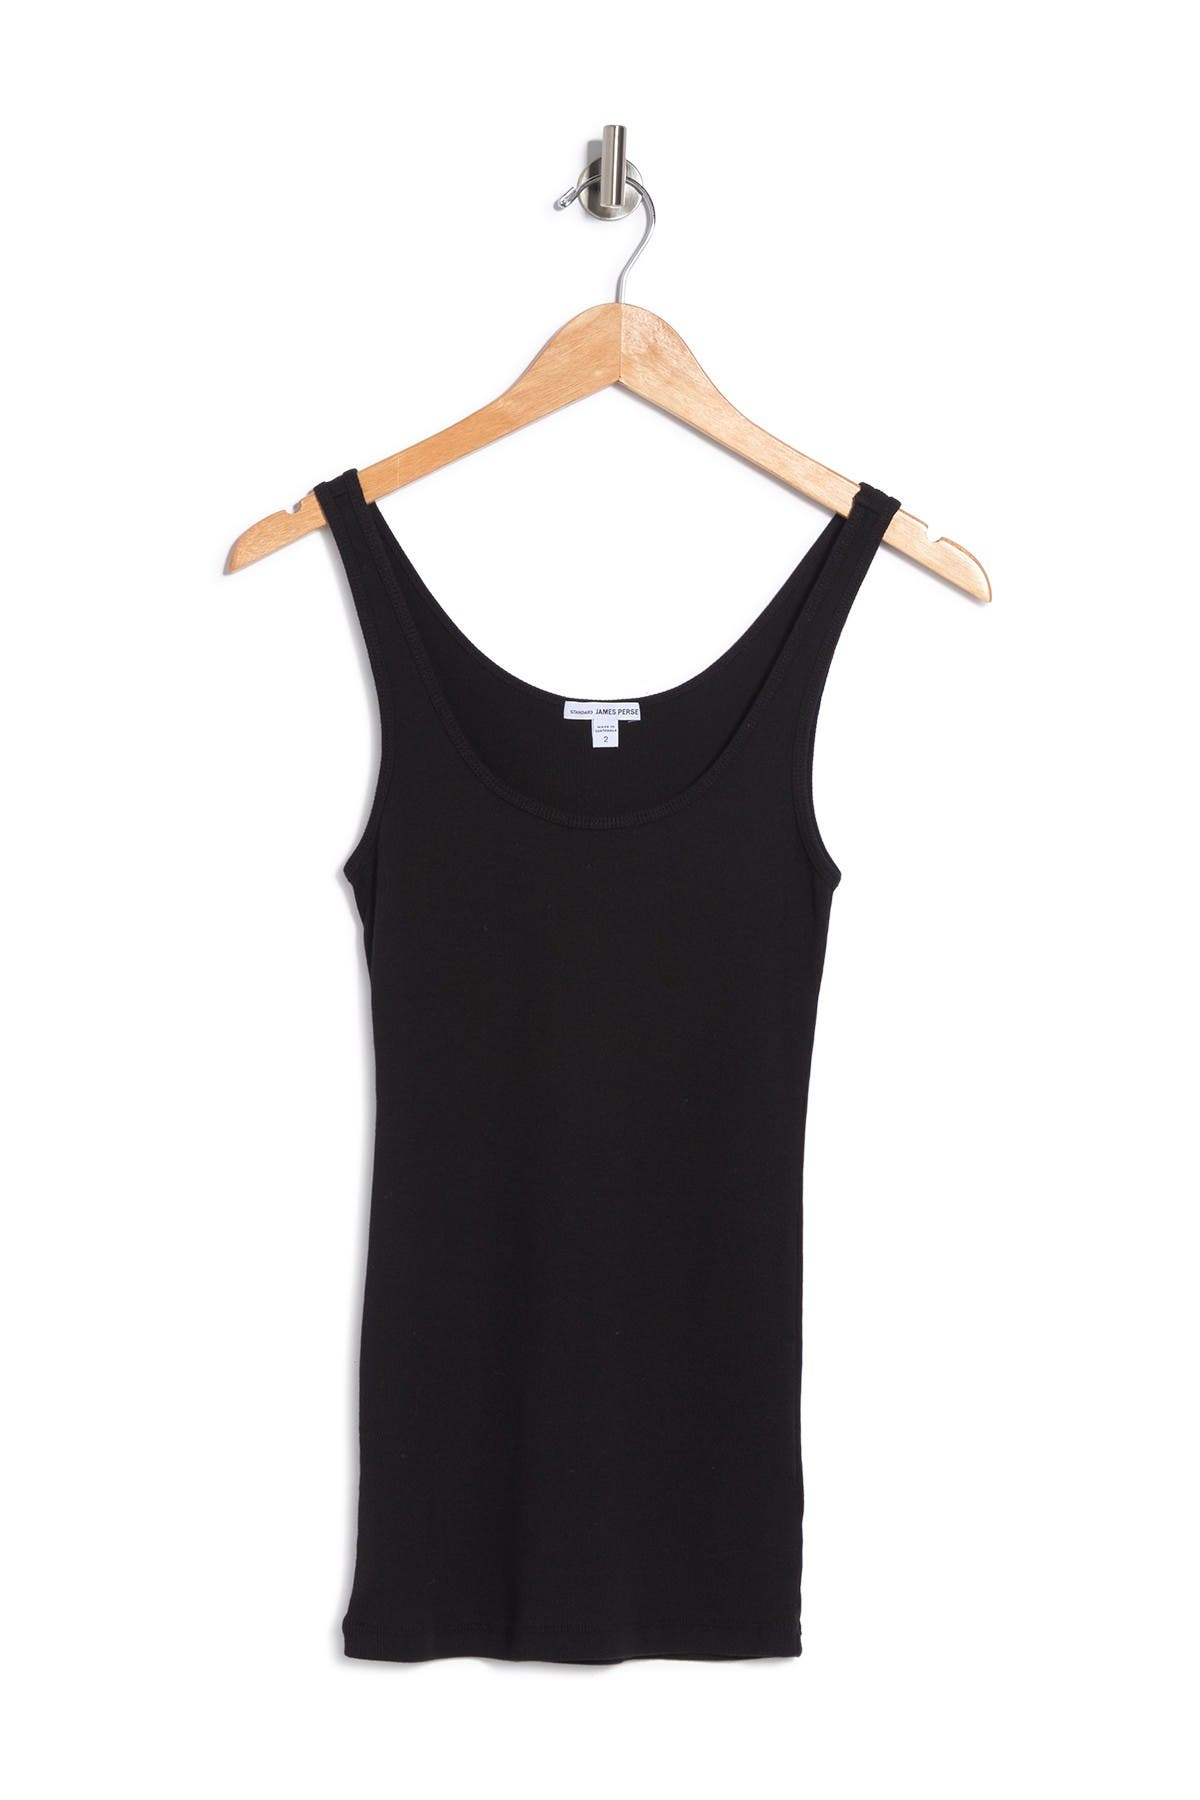 James Perse Ribbed Knit Tank In Black